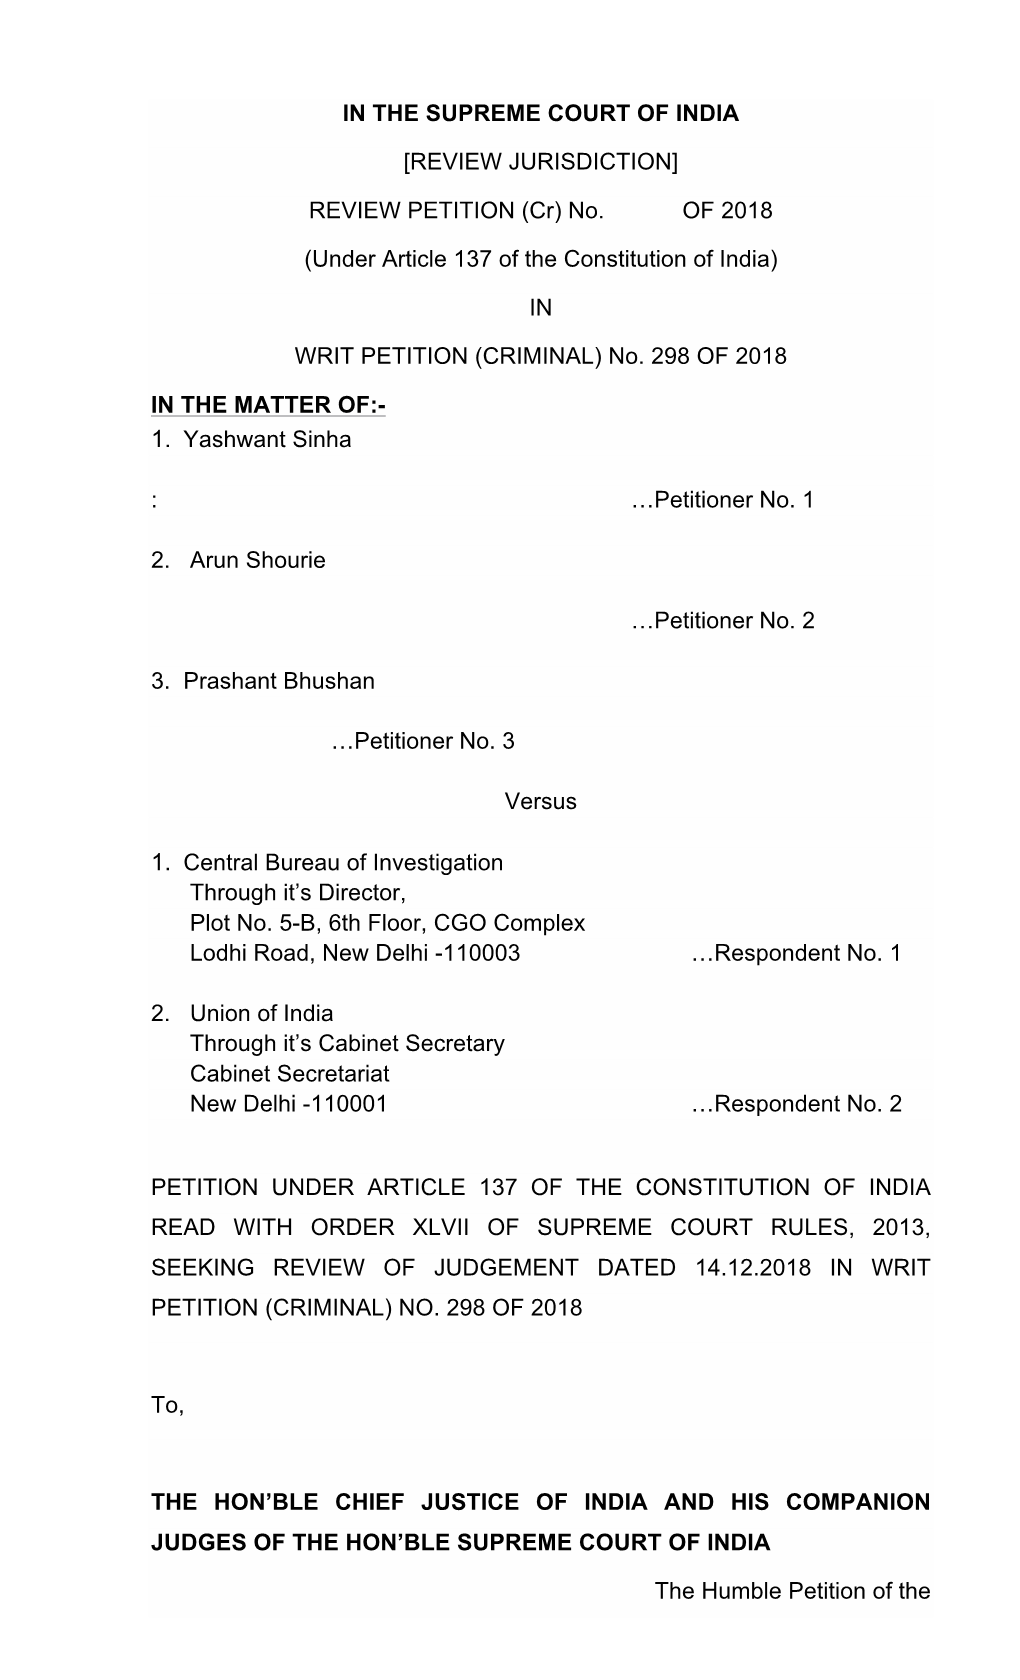 REVIEW PETITION (Cr) No. of 2018 (Under Article 137 of the Constitution